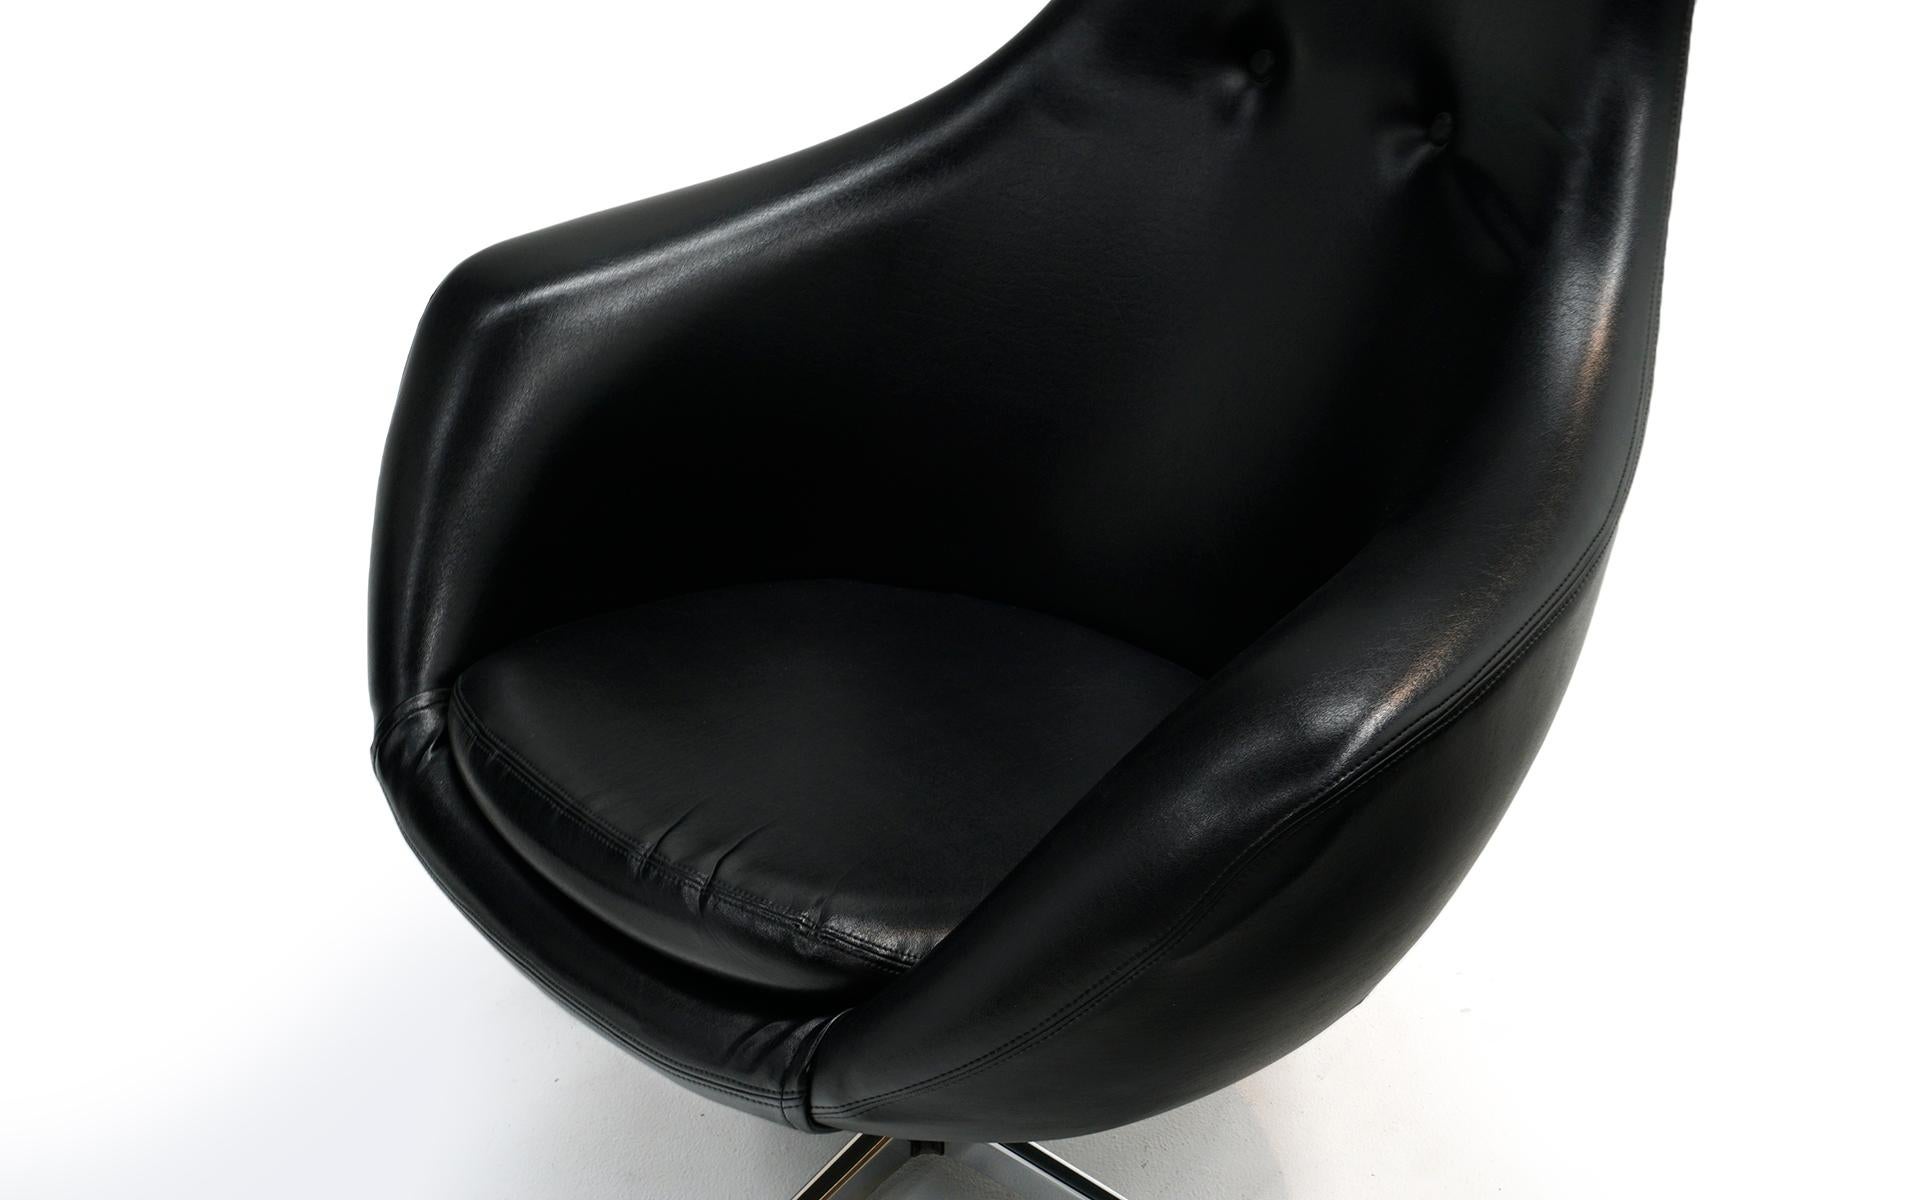 Canadian Black Swivel Chairs by Overman, One High Back, One Standard, Ready to Use, Pair